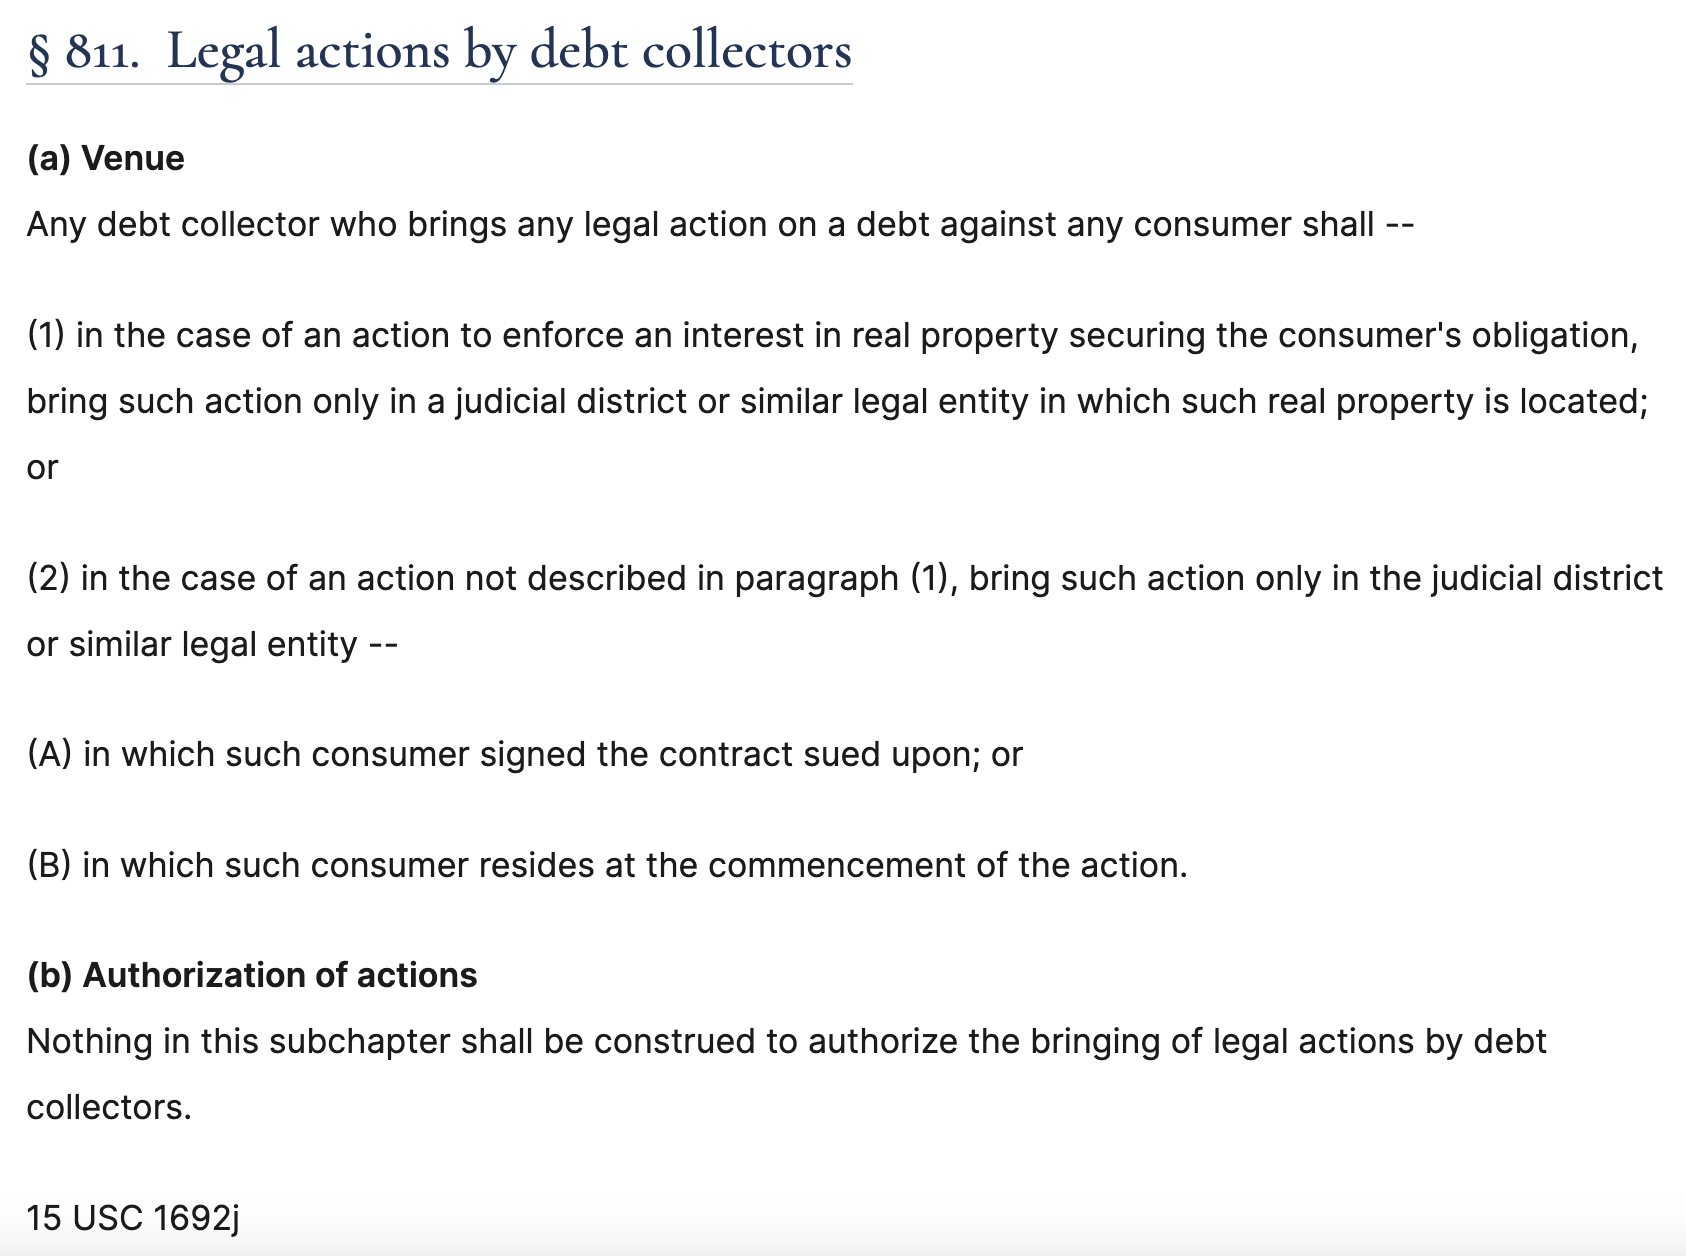 Image of a text document detailing legal actions regarding debt collection in Texas, including stipulations on where lawsuits can be enforced.